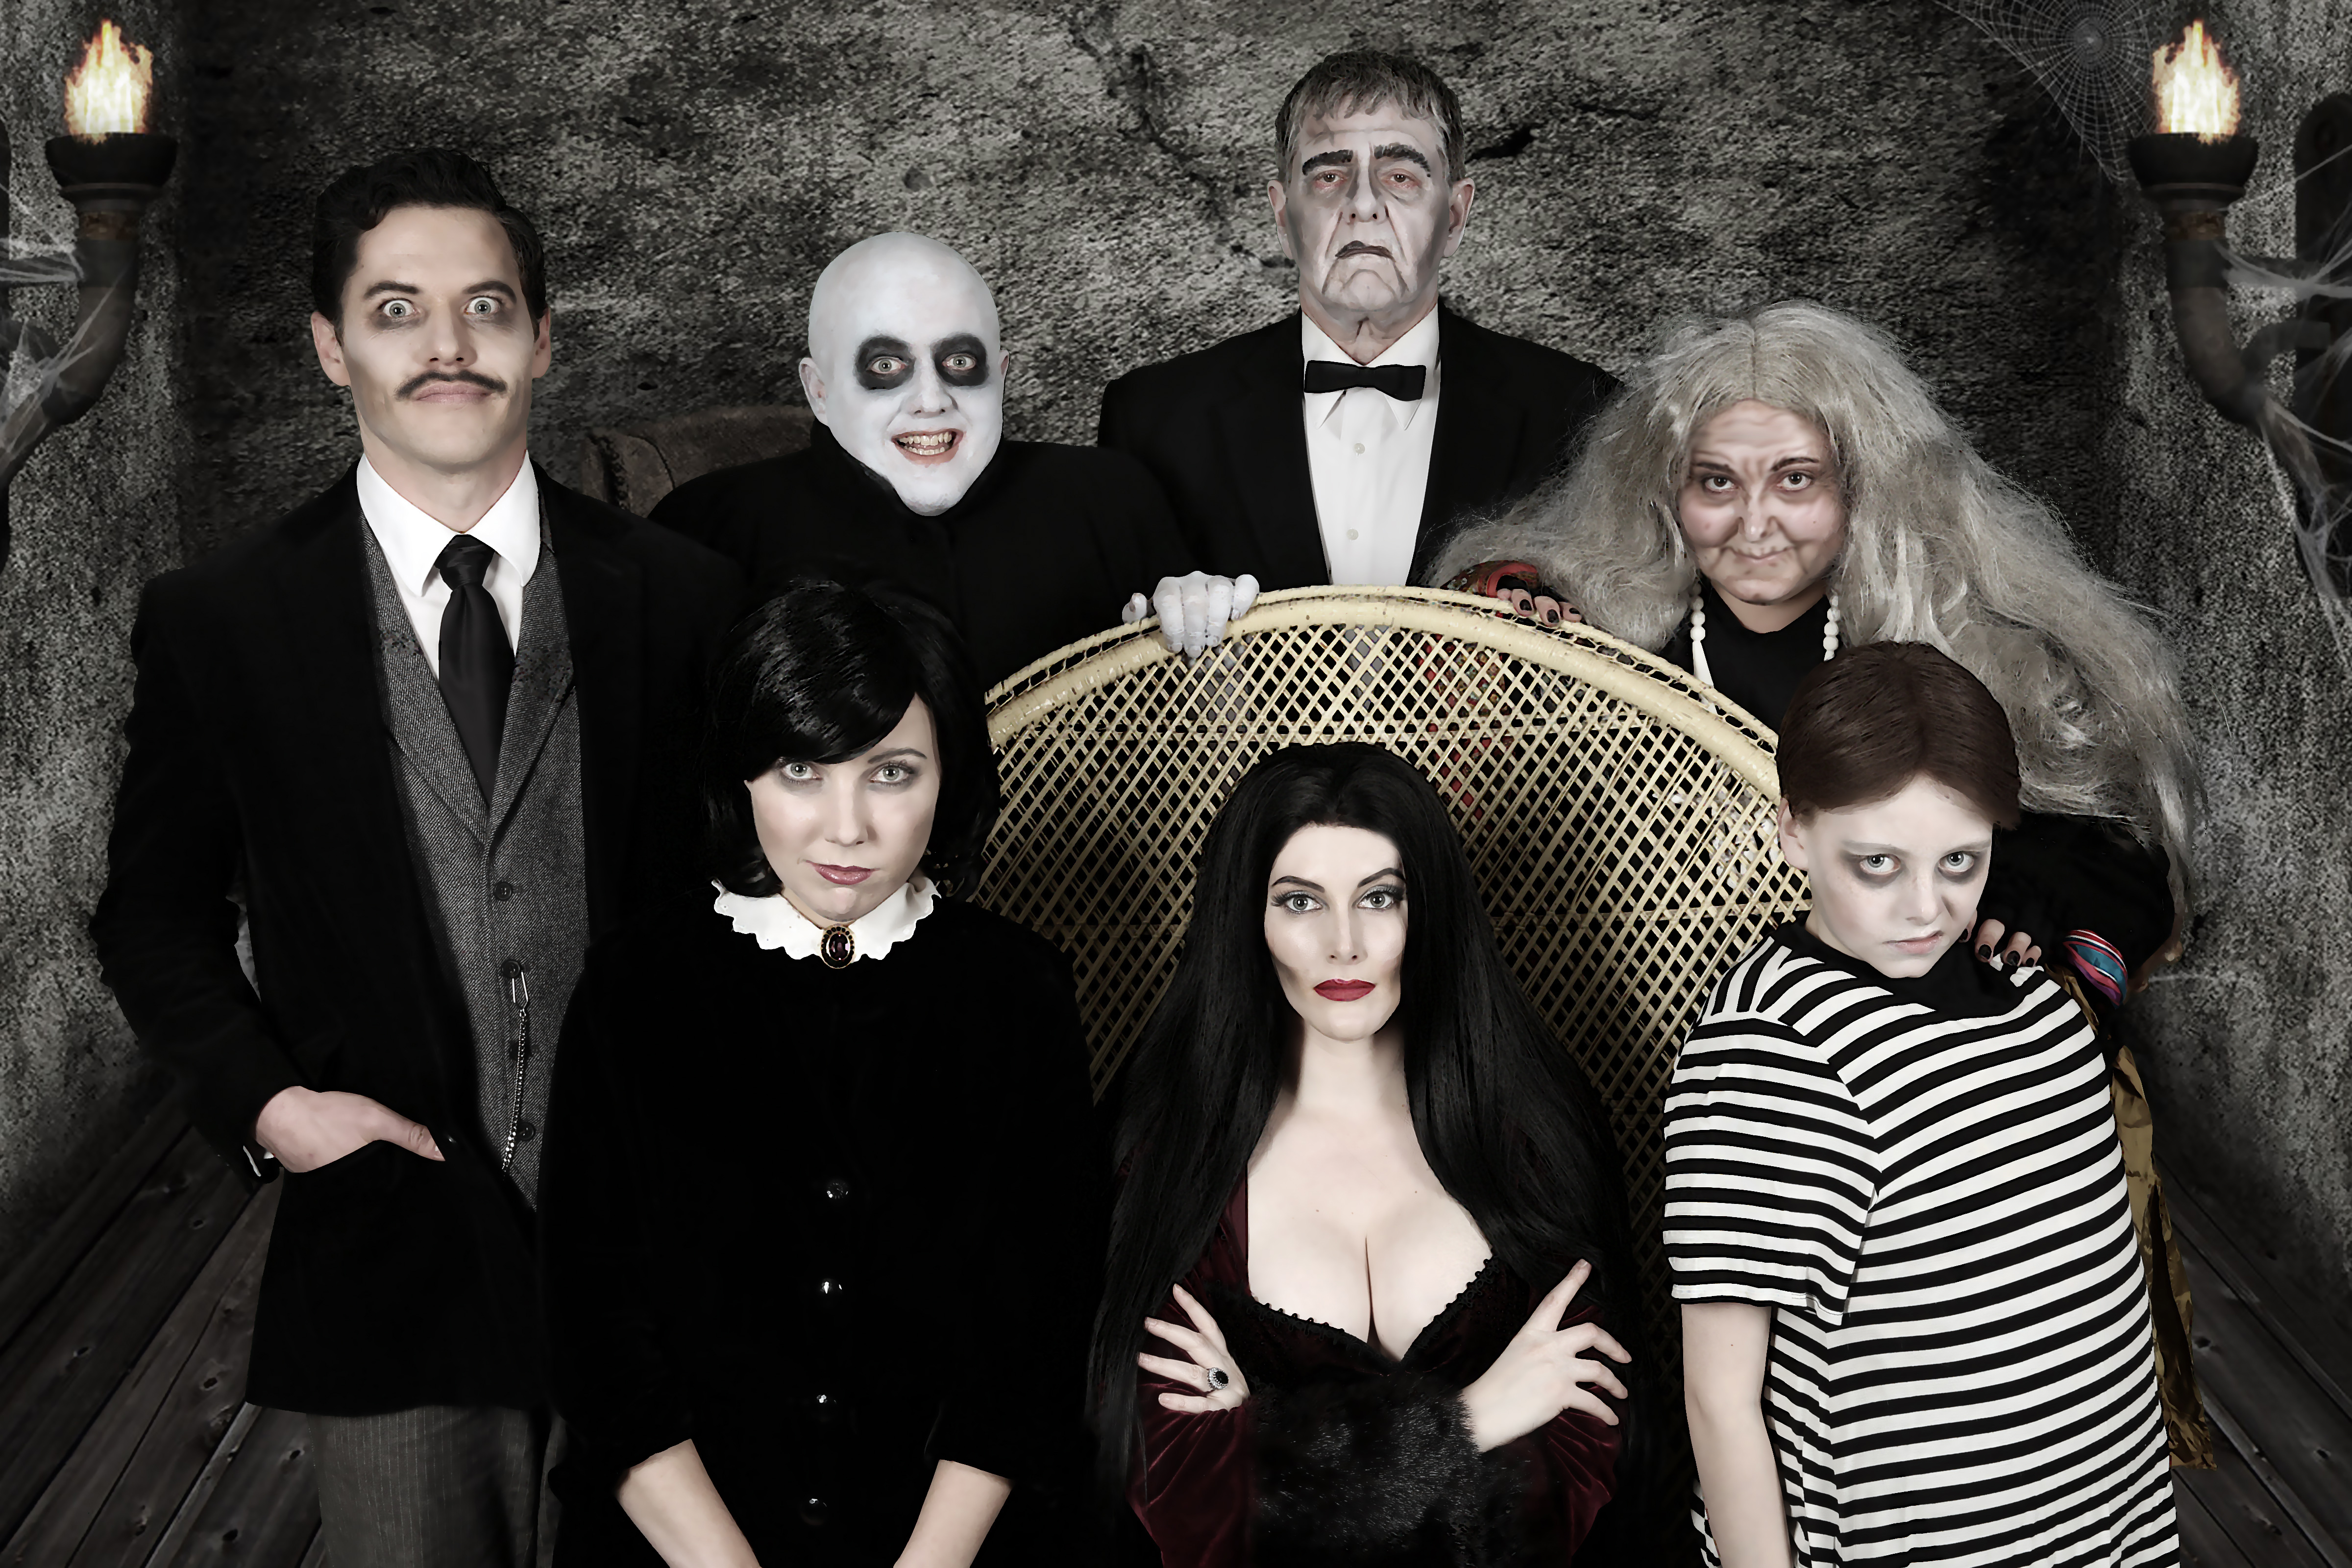 The addams family photo